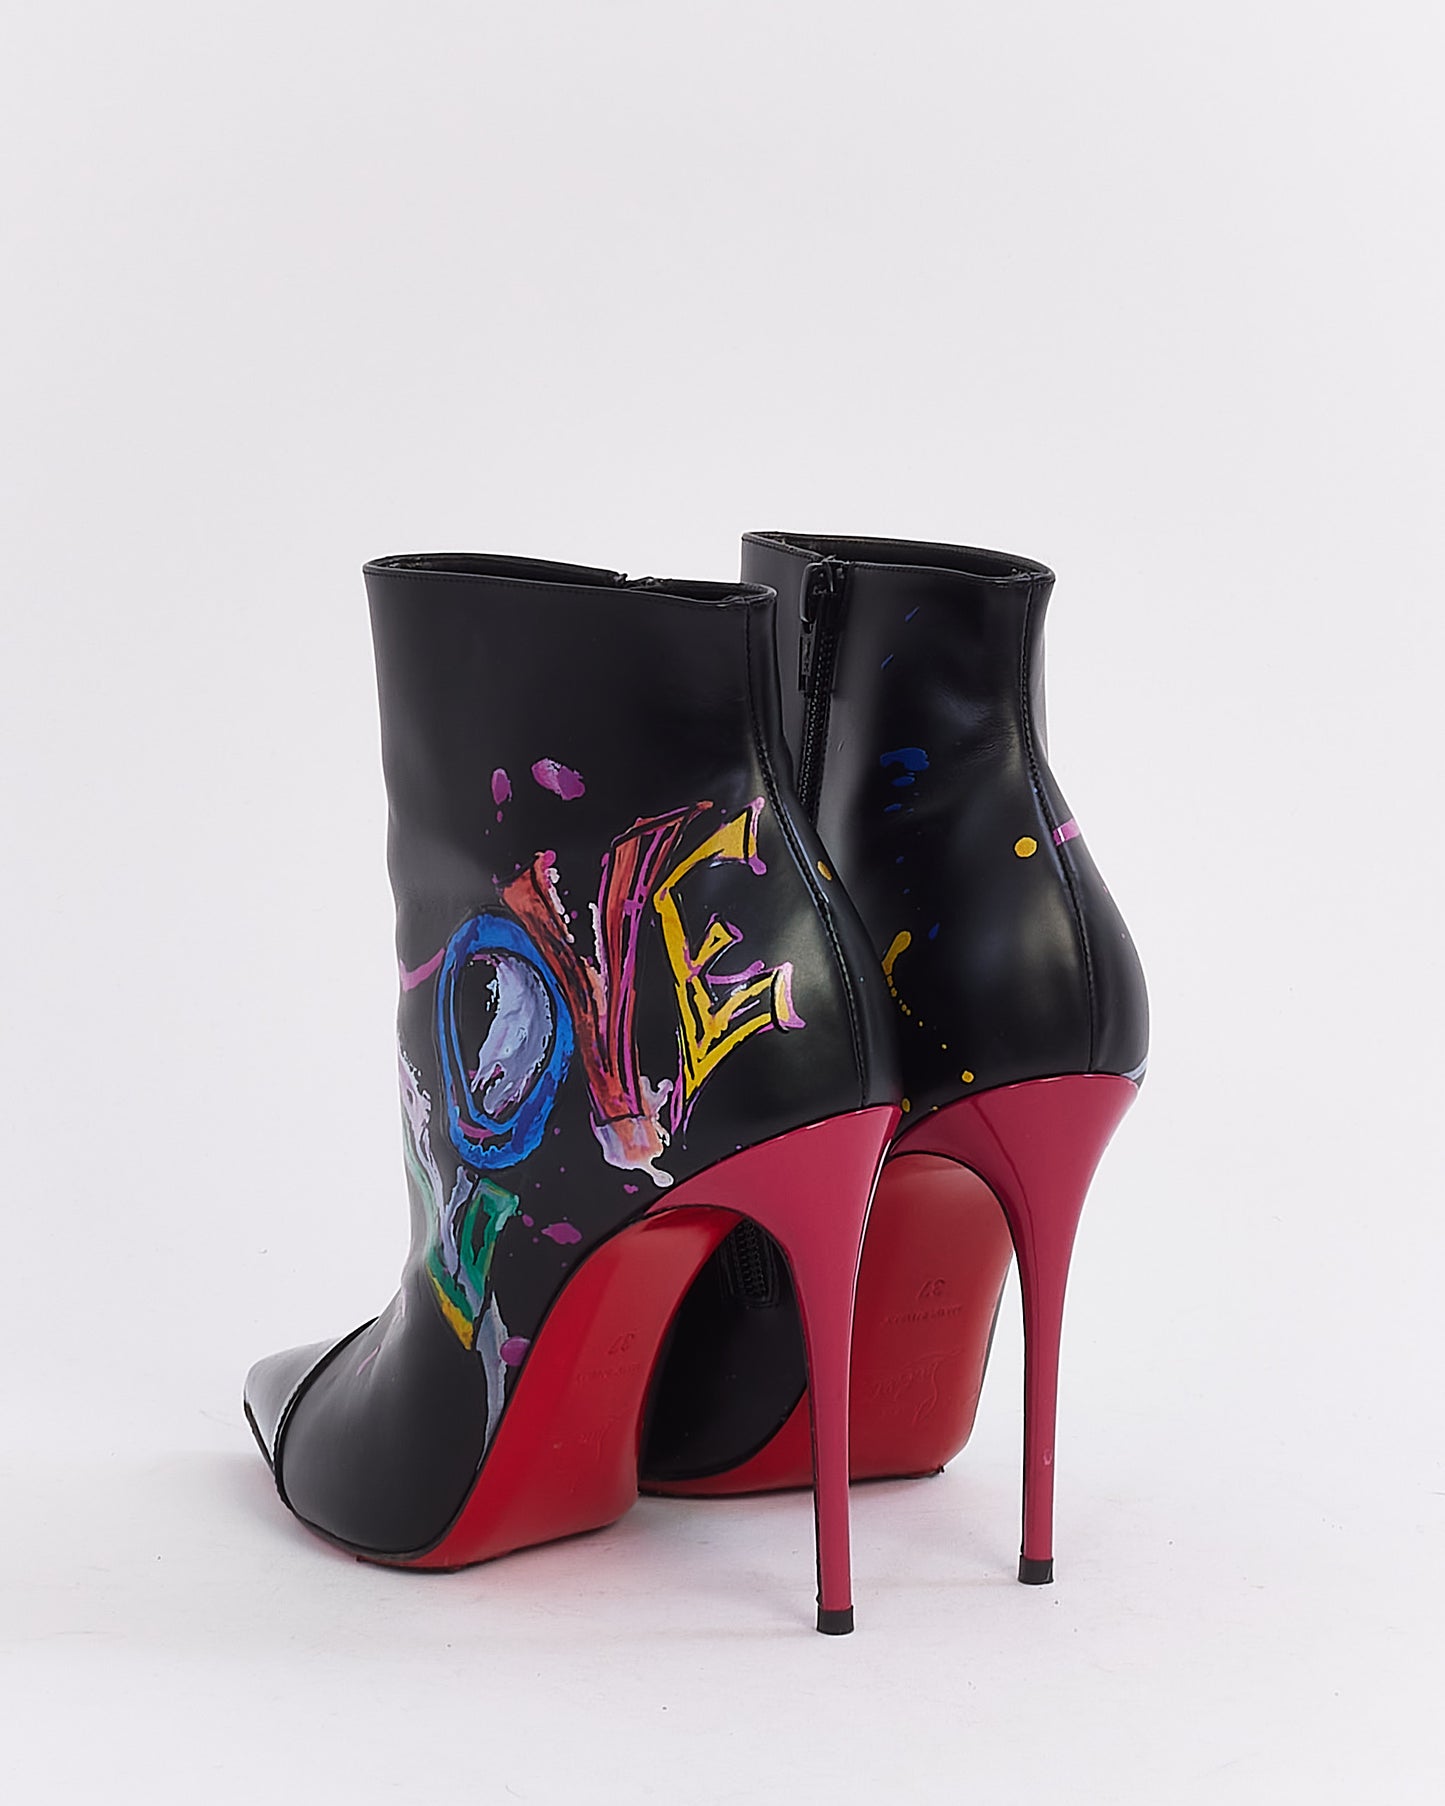 Christian Louboutin Black Leather LOVE So Kate Booty Ankle Boots - 37